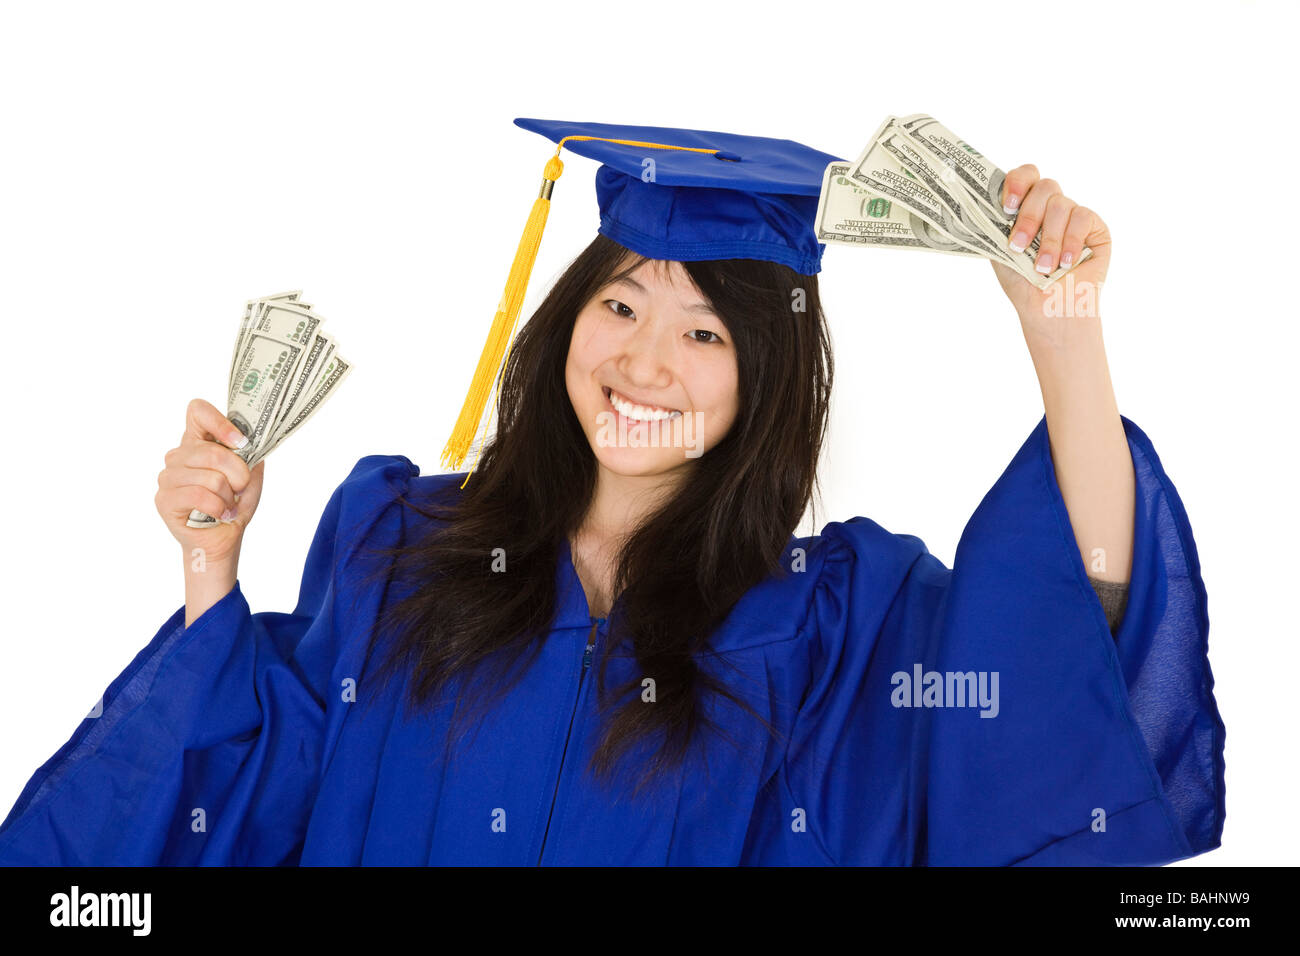 An Asian Teenager In A Graduation Gown Smiling While Holding Money ...